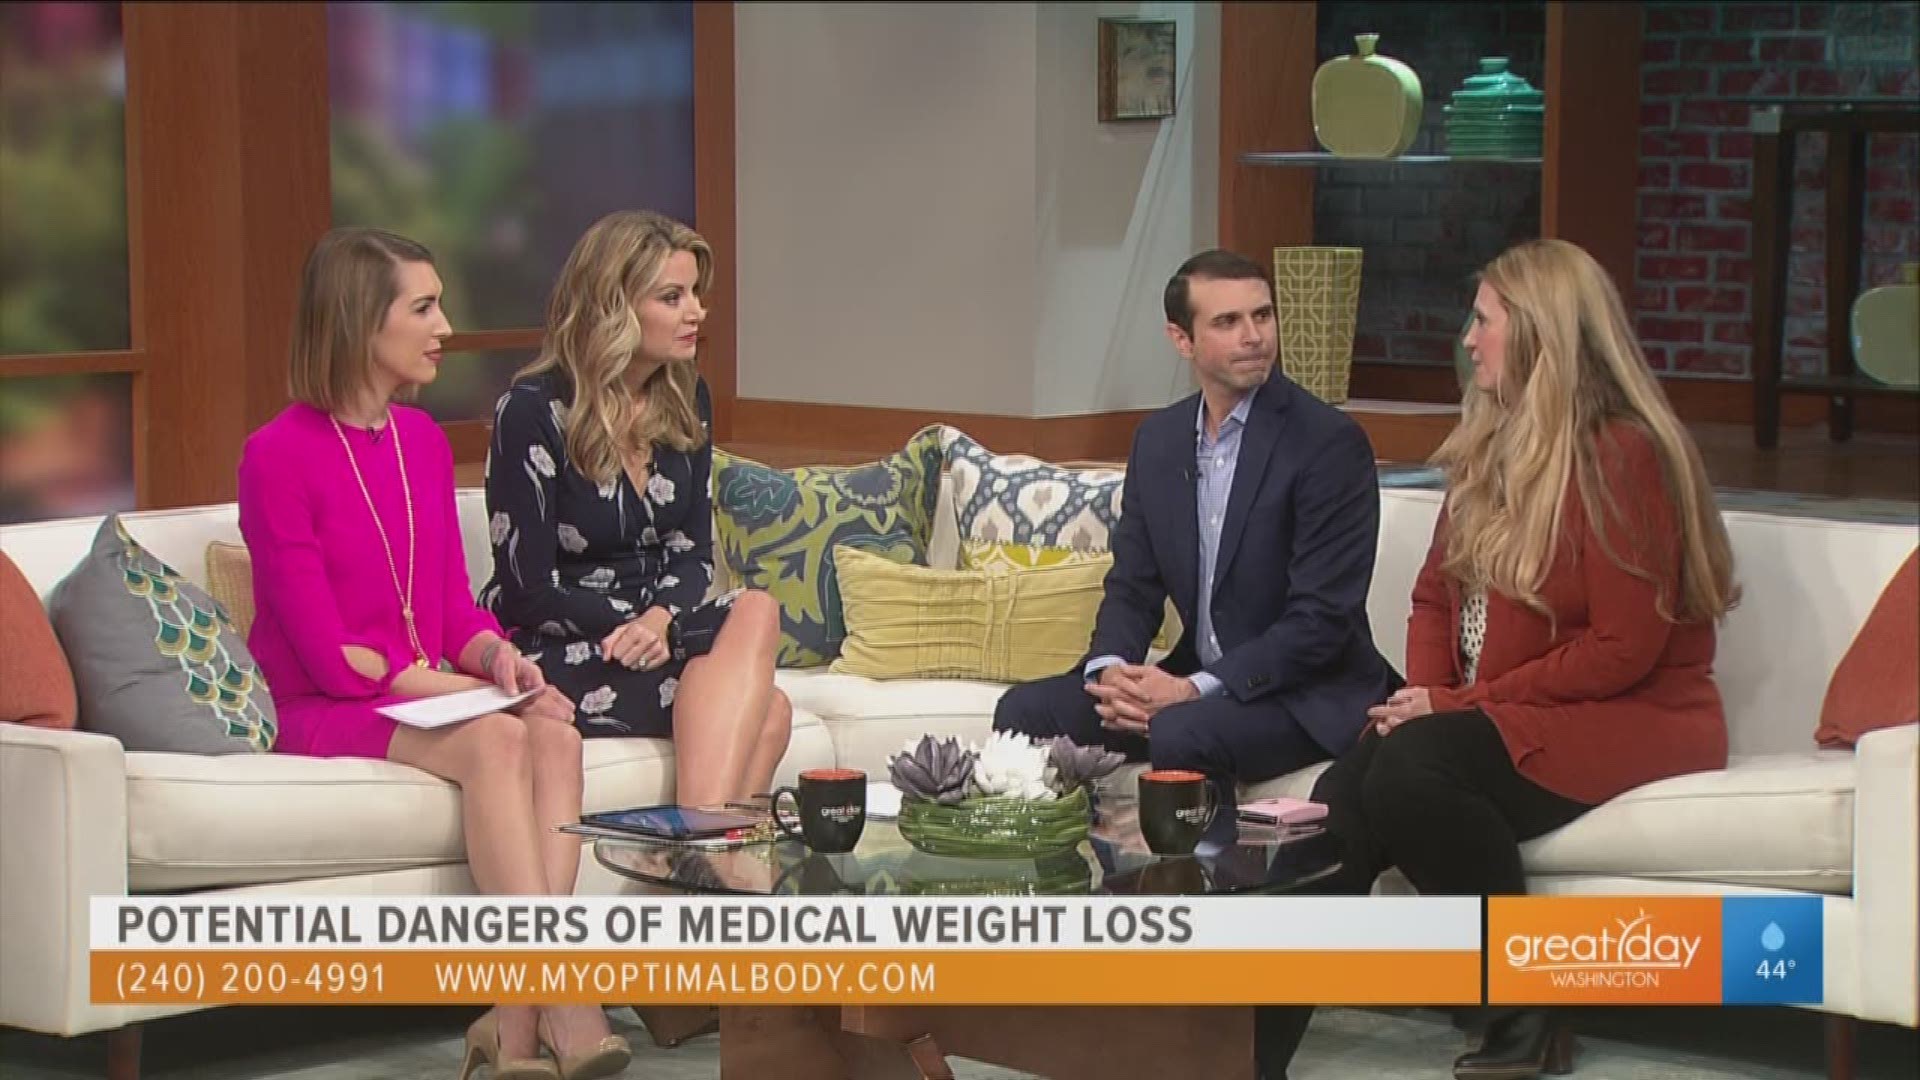 Dr. Cory Aplin introduces Debra Walker who lost 36lbs in 40 days working with Optimal Body's program, for more info call (240) 200-4991.  Sponsored by Optimal Body.